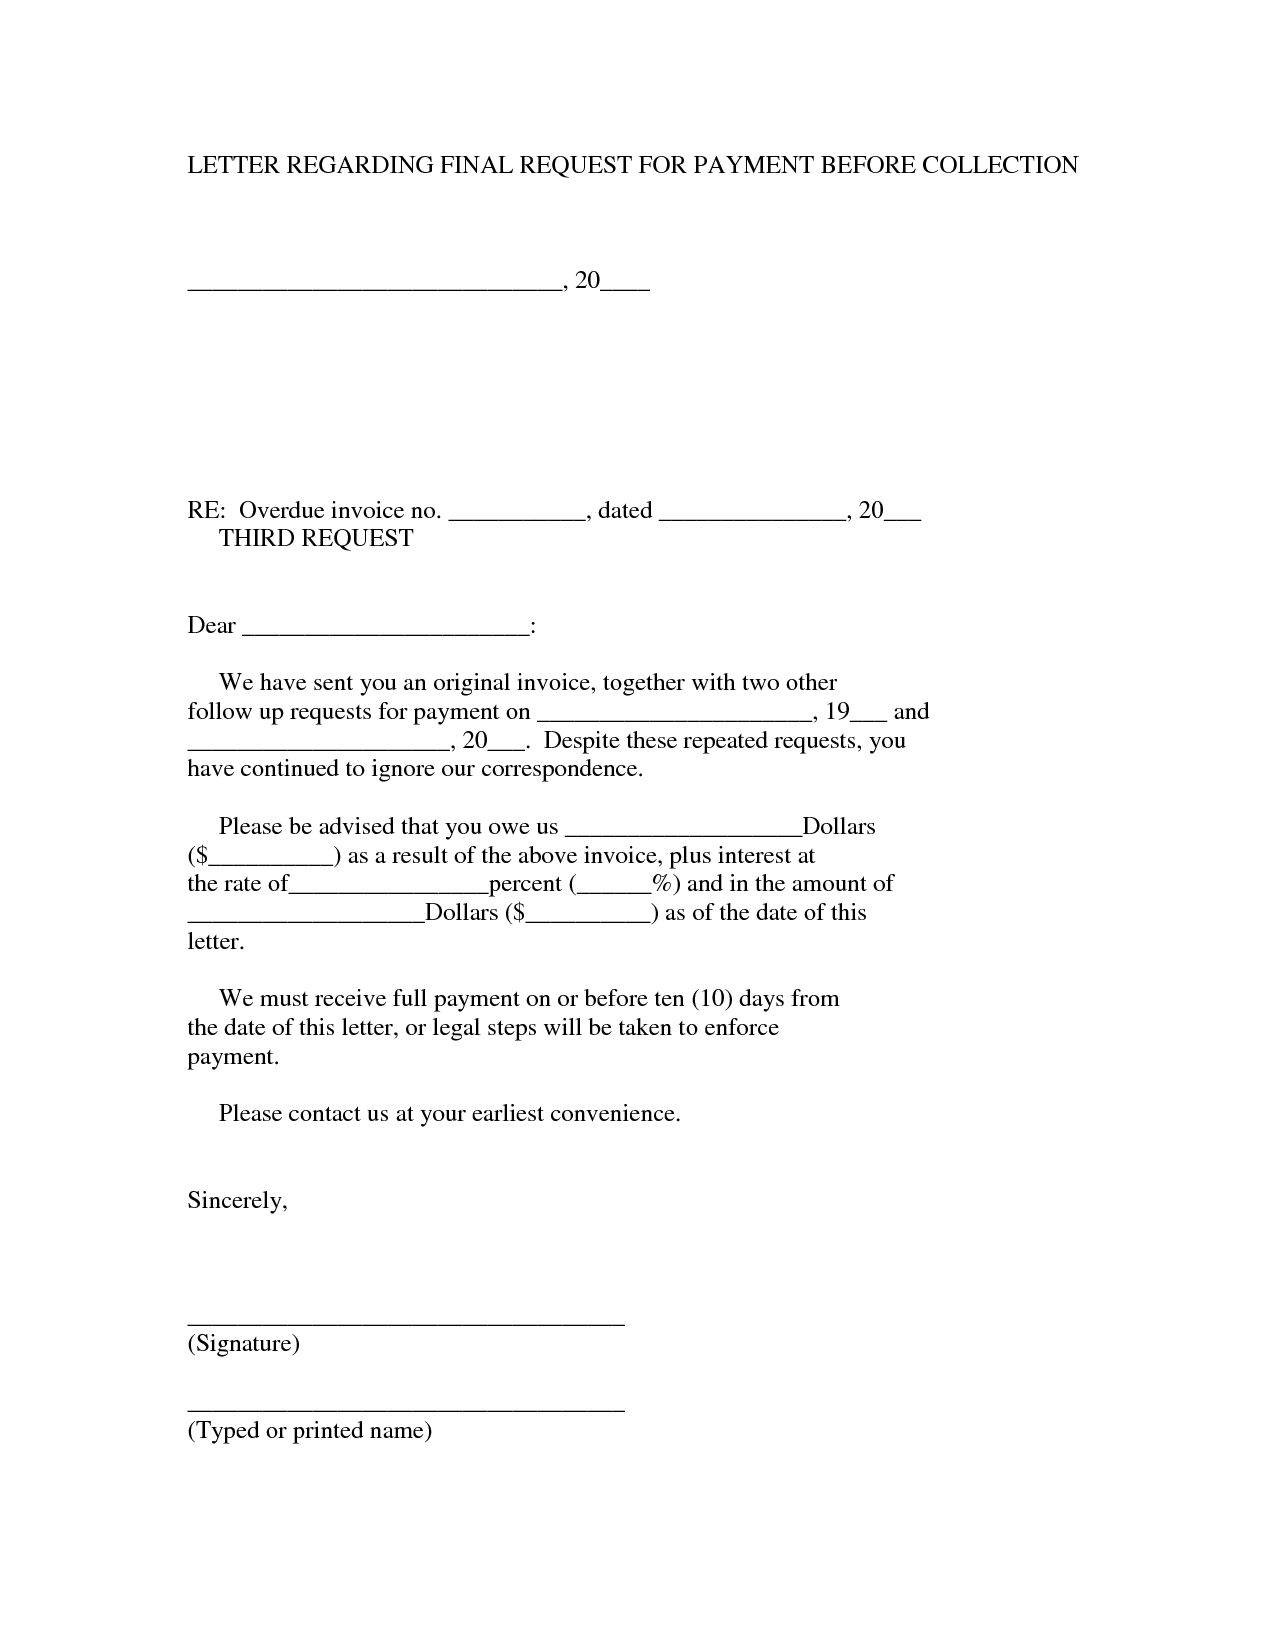 17 best photos of final payment letter final payment demand need to pay invoice letter